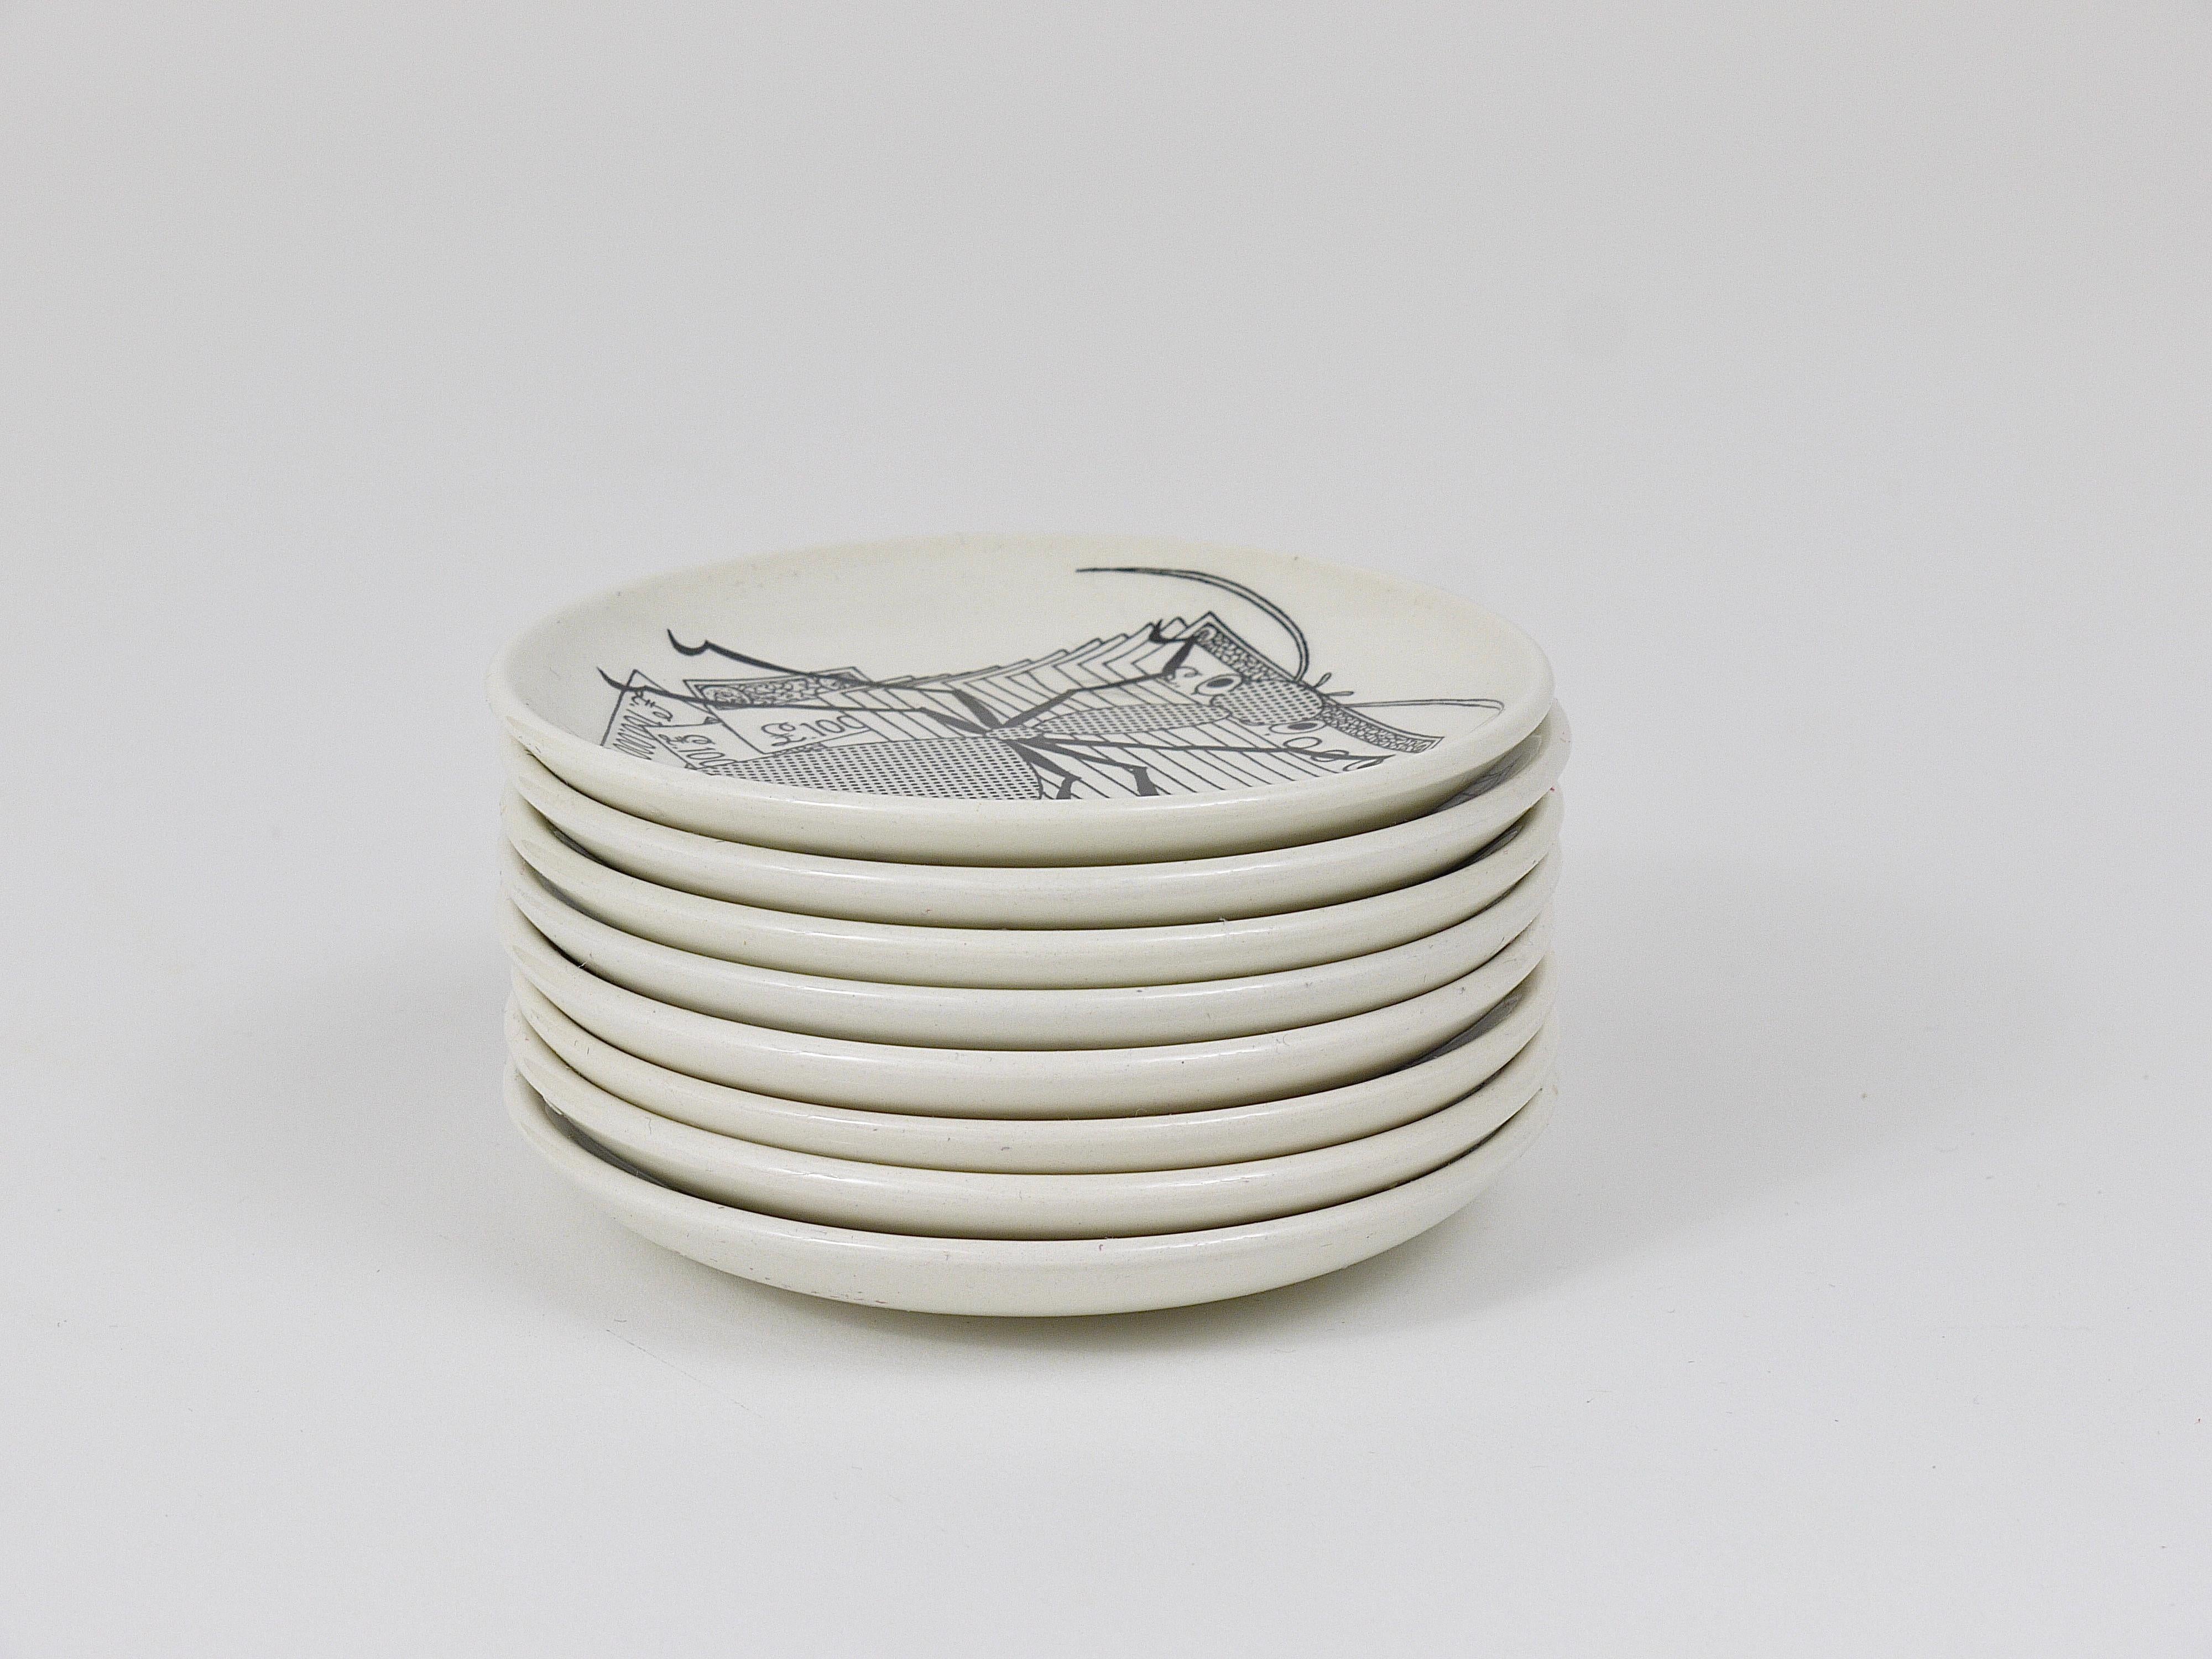 A set of eight beautiful black and white small plates or coasters displaying drawn animals with money. (snail, piggy bank, dog, hen, turtle, duck, bee and ant) By Piero Fornasetti, Italy, 1950s. In very good condition with marginal wear. Measures: